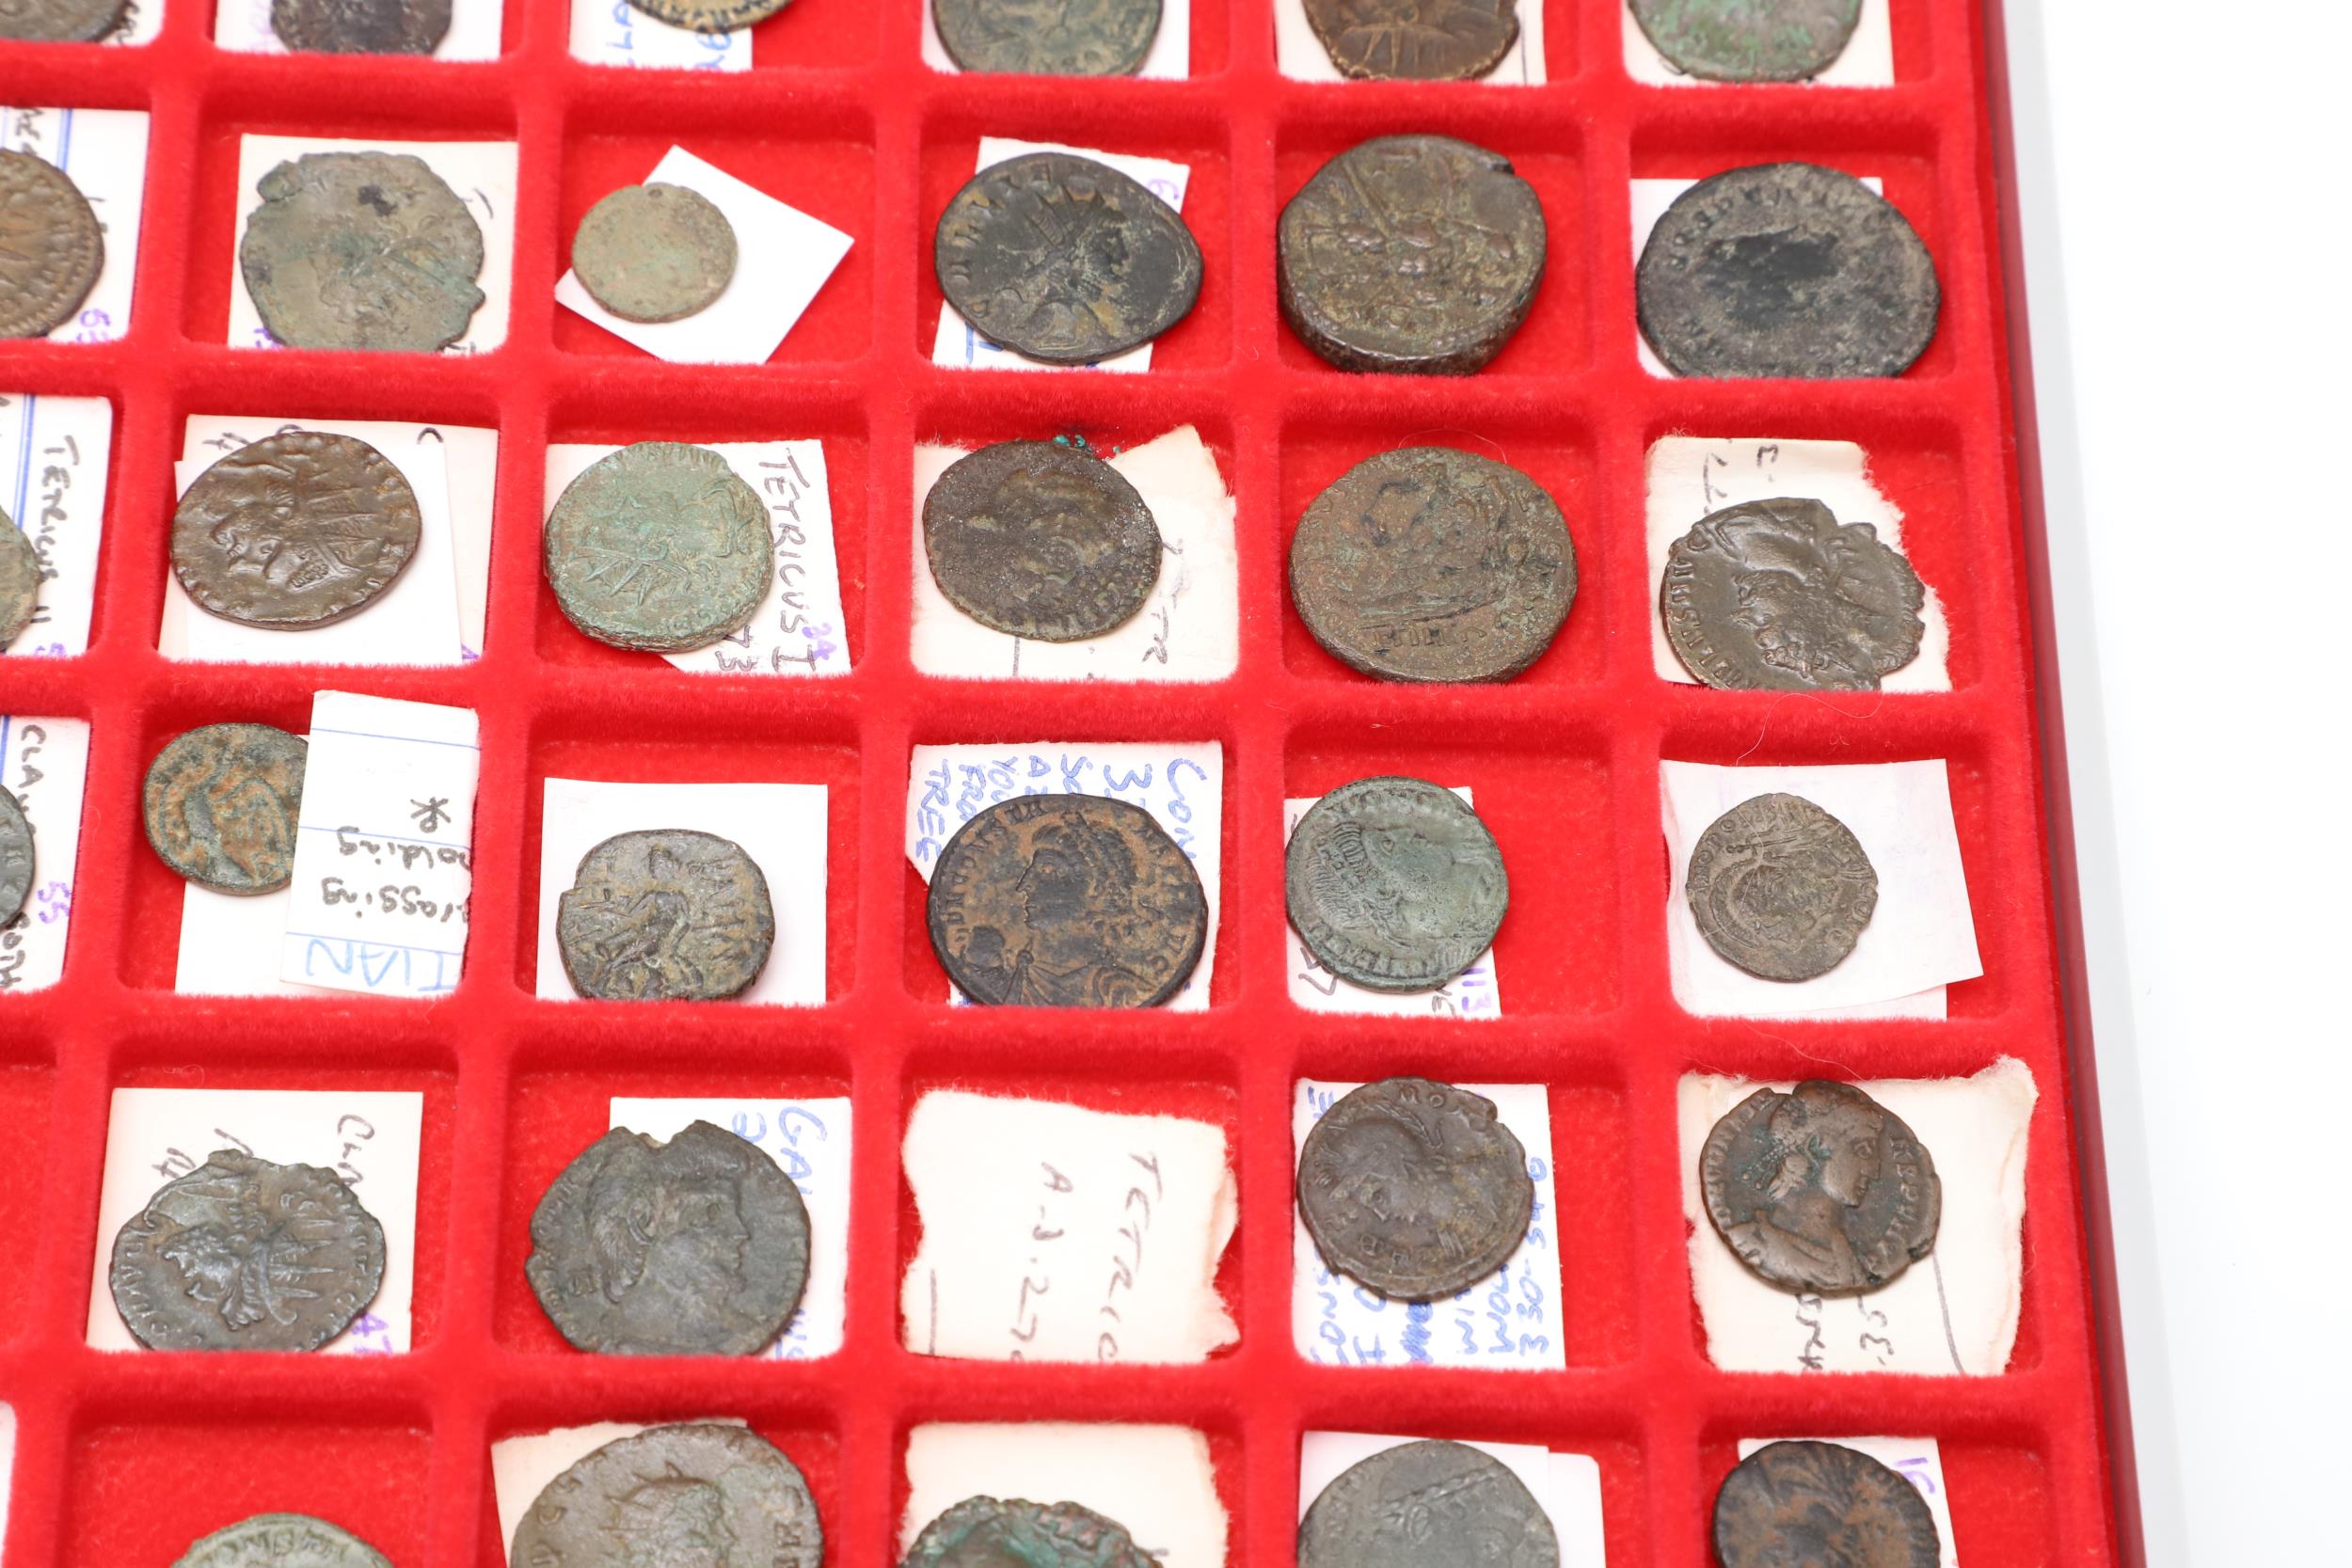 A COLLECTION OF ROMAN COINS IN A LINDNER COIN TRAY. - Image 7 of 11